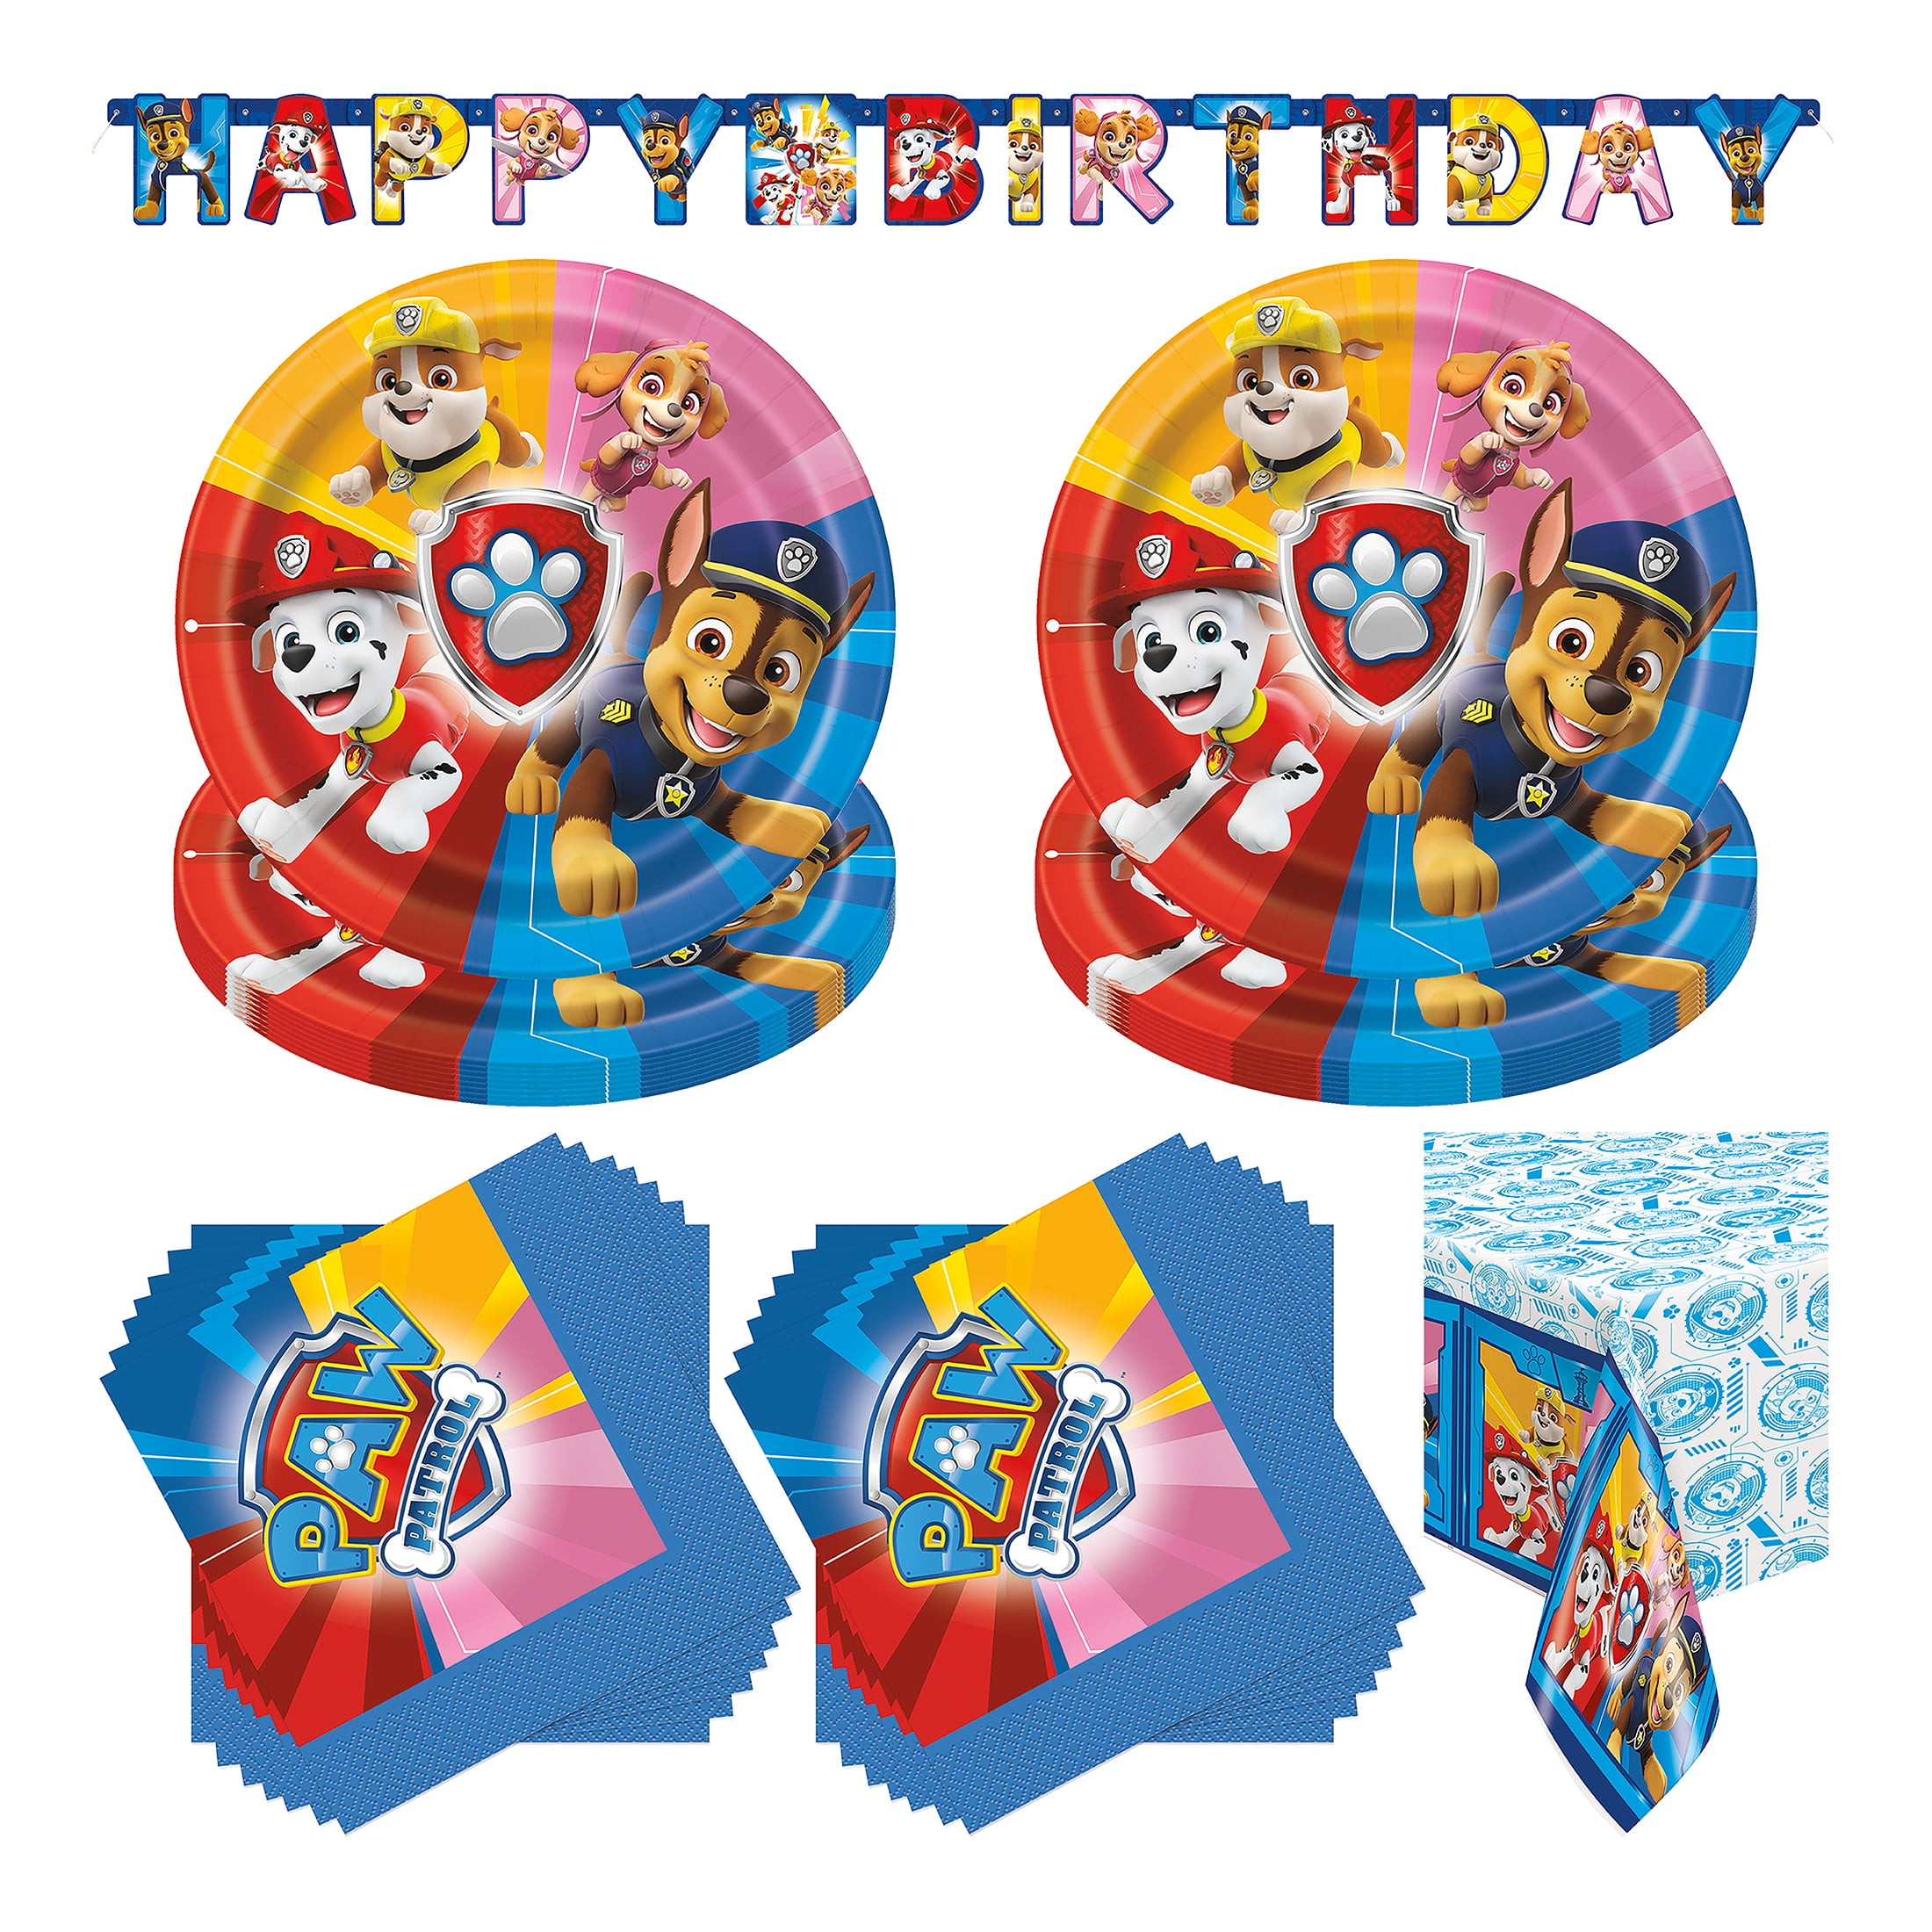 16 Cake Plates Paw Patrol Birthday Party Supplies 16 Guests Plates 32 Napkins 